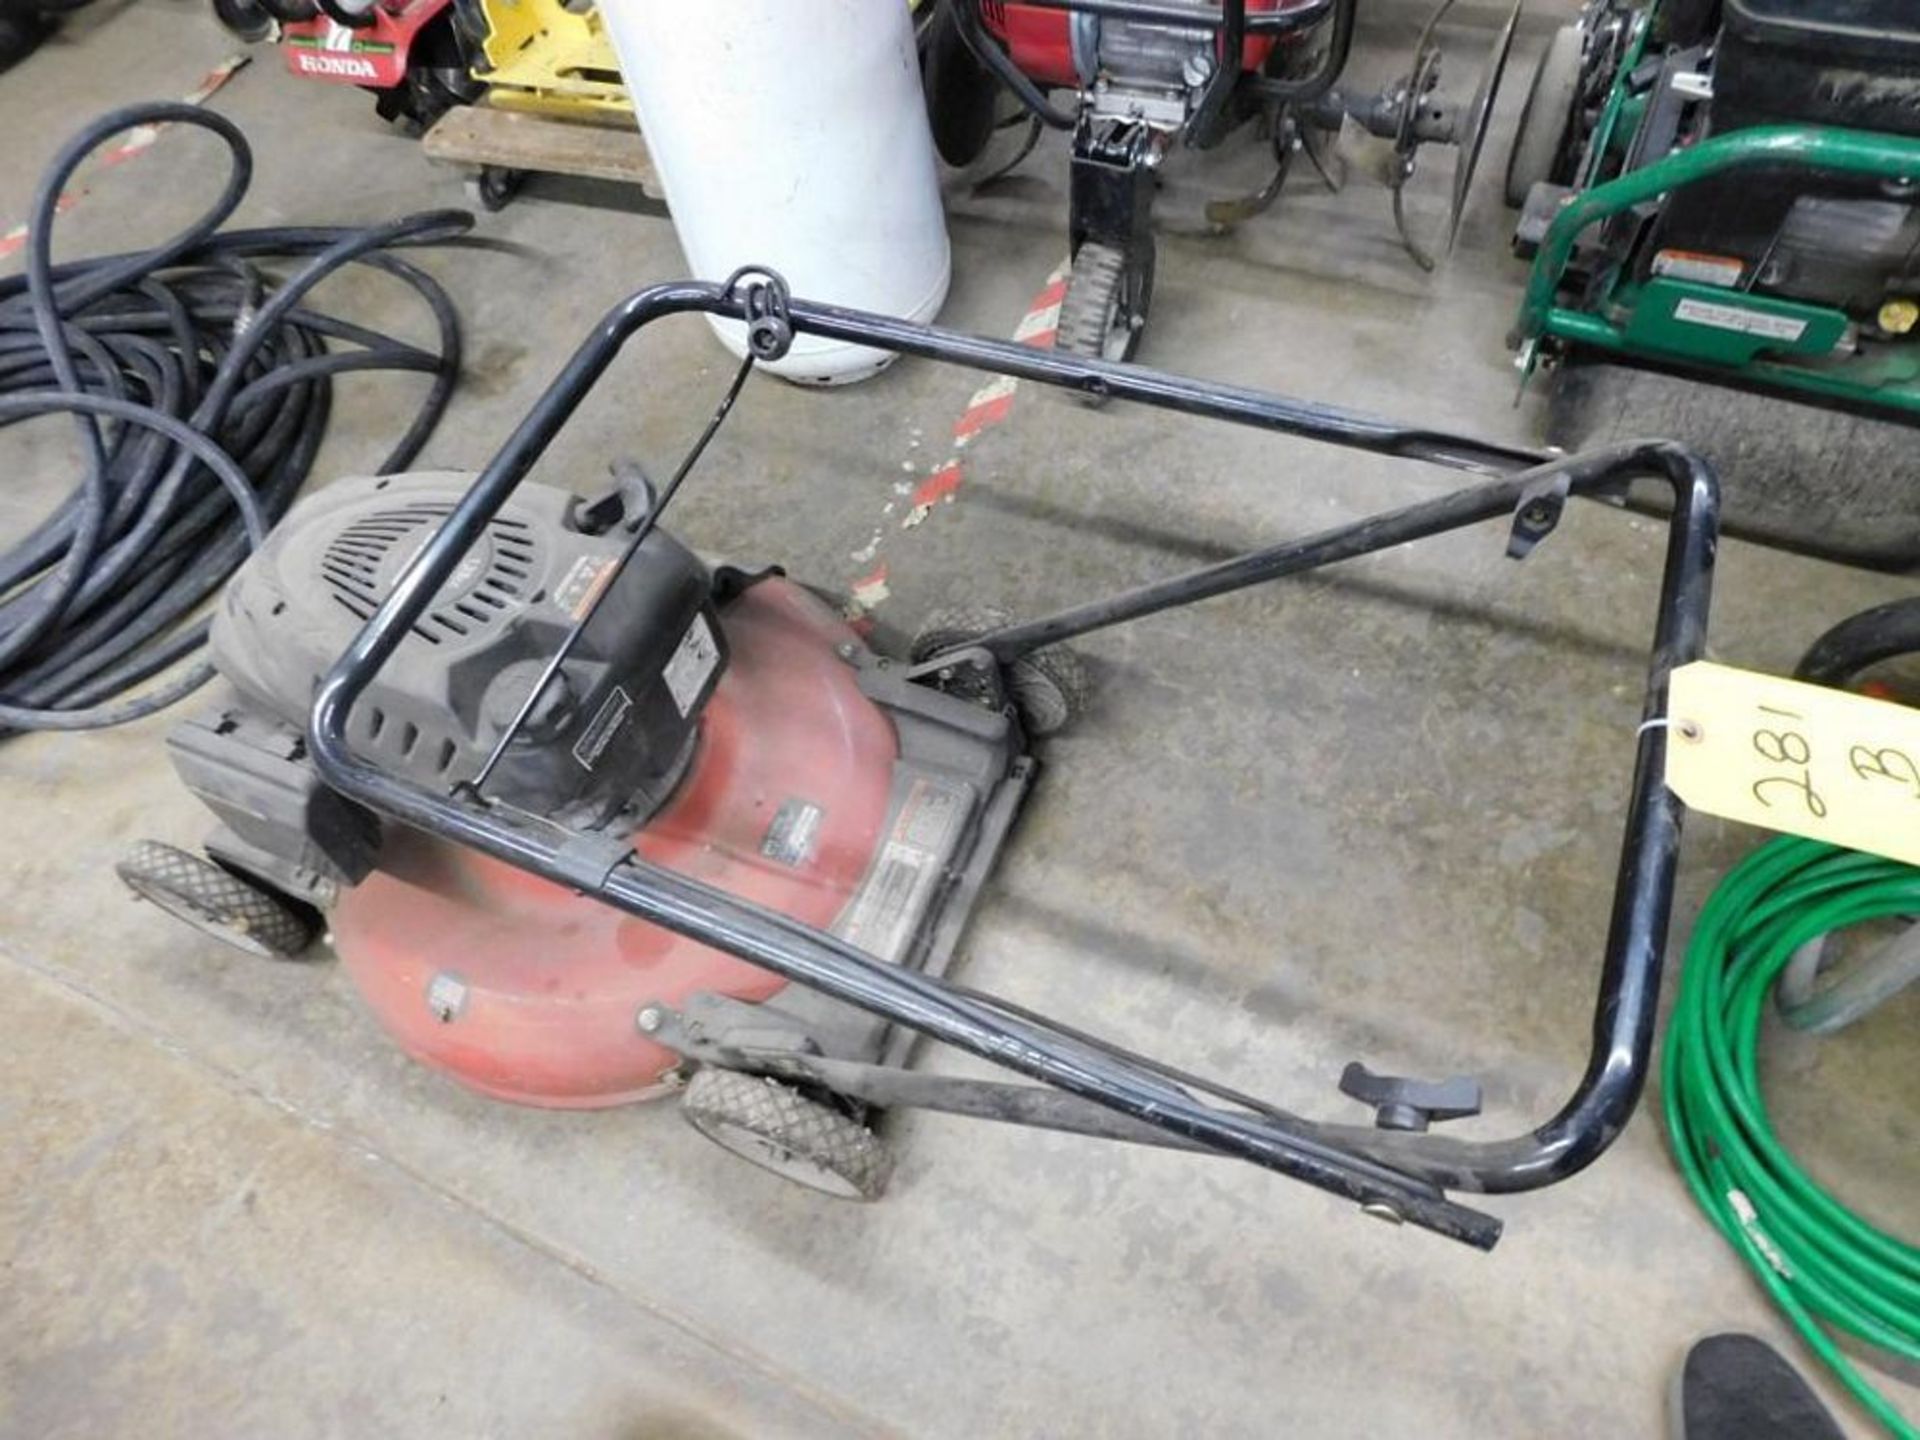 Southland Cyclonic Forge Mower (LOCATION: 318 N. Milwaukee Ave., Wheeling, IL 60090)